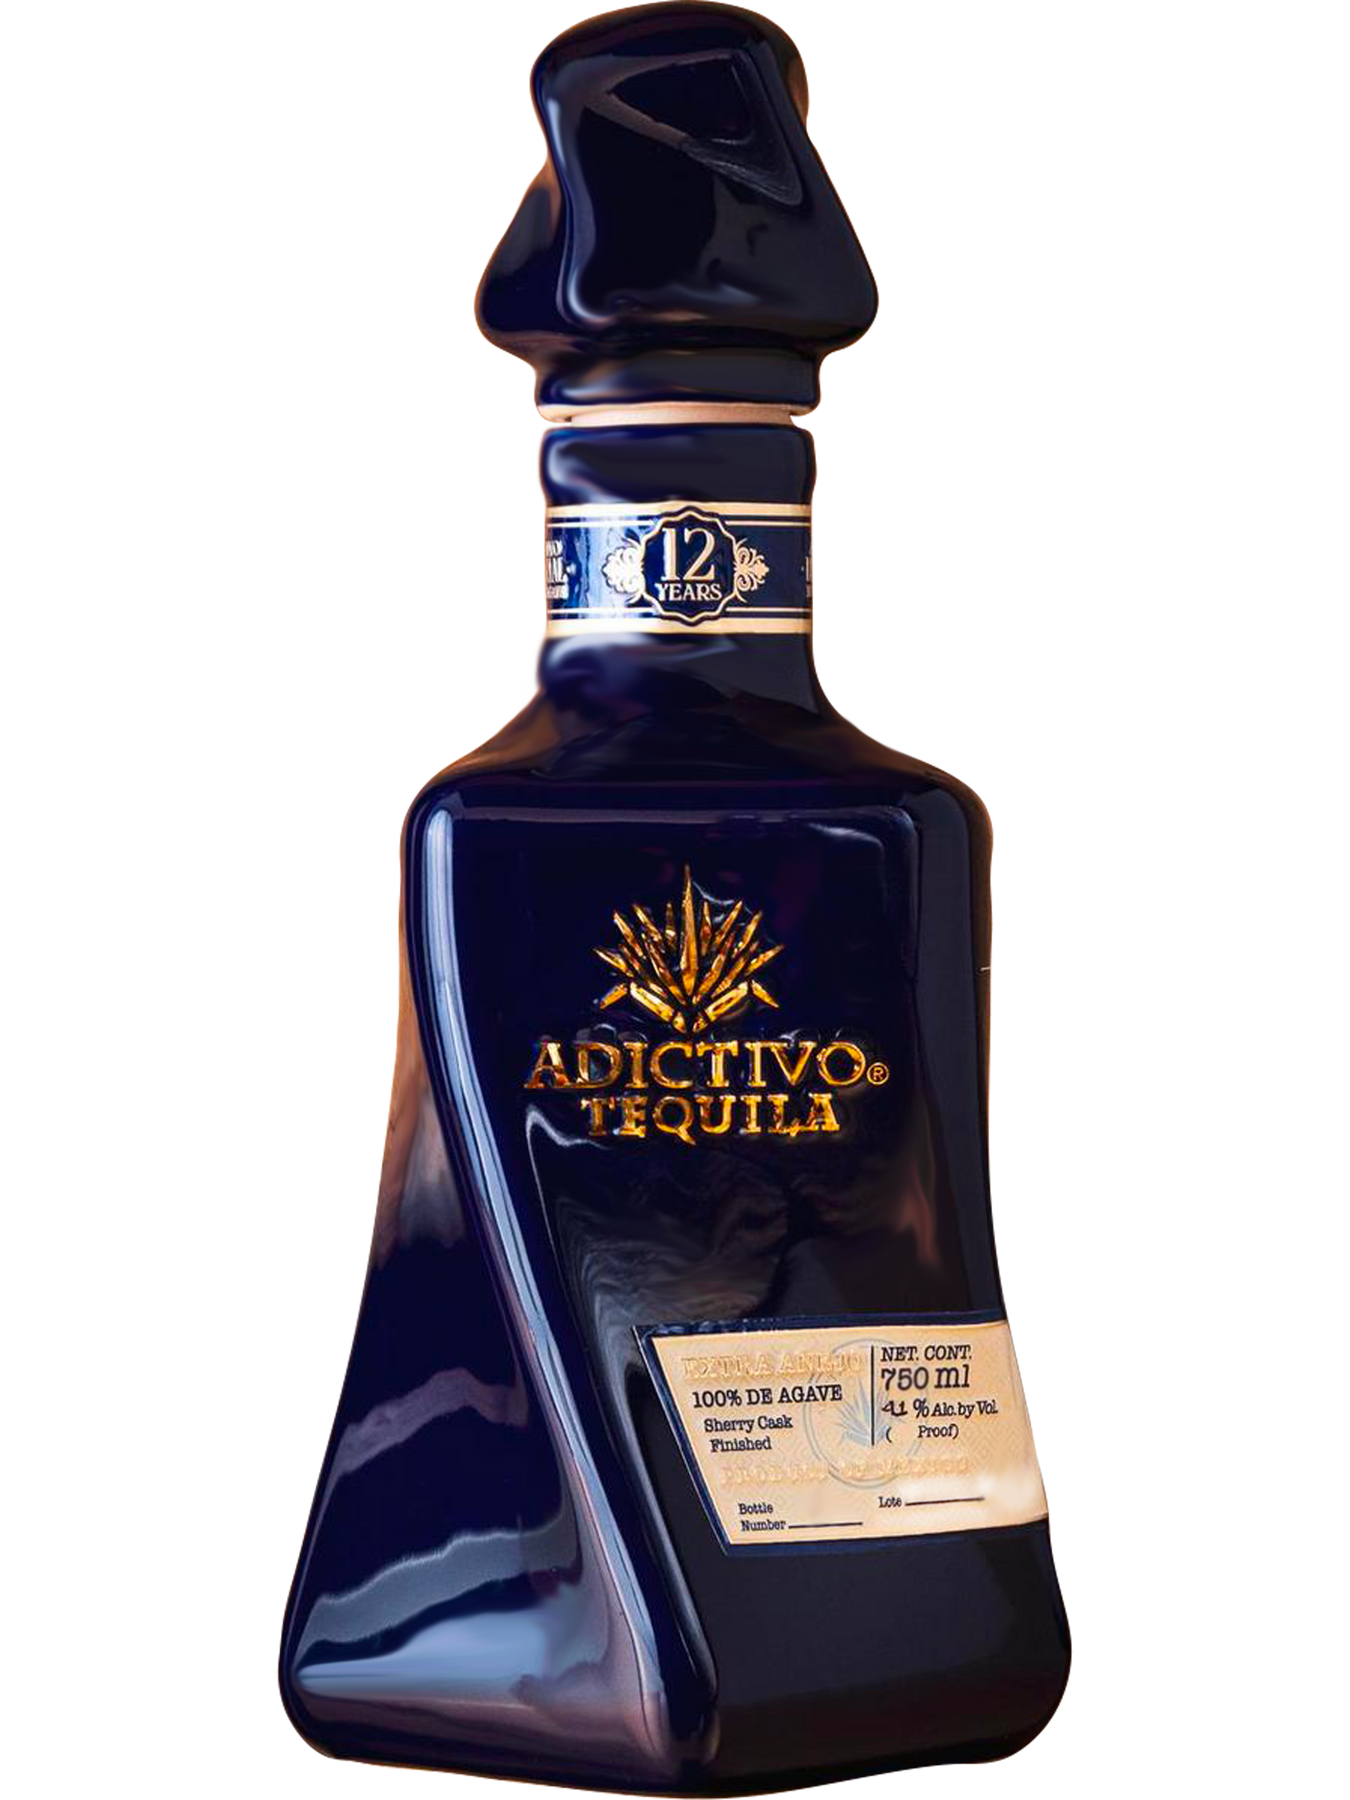 Image of Adictivo Imperial for Limited and special edition tequilas. Adictivo Tequila Imperial.